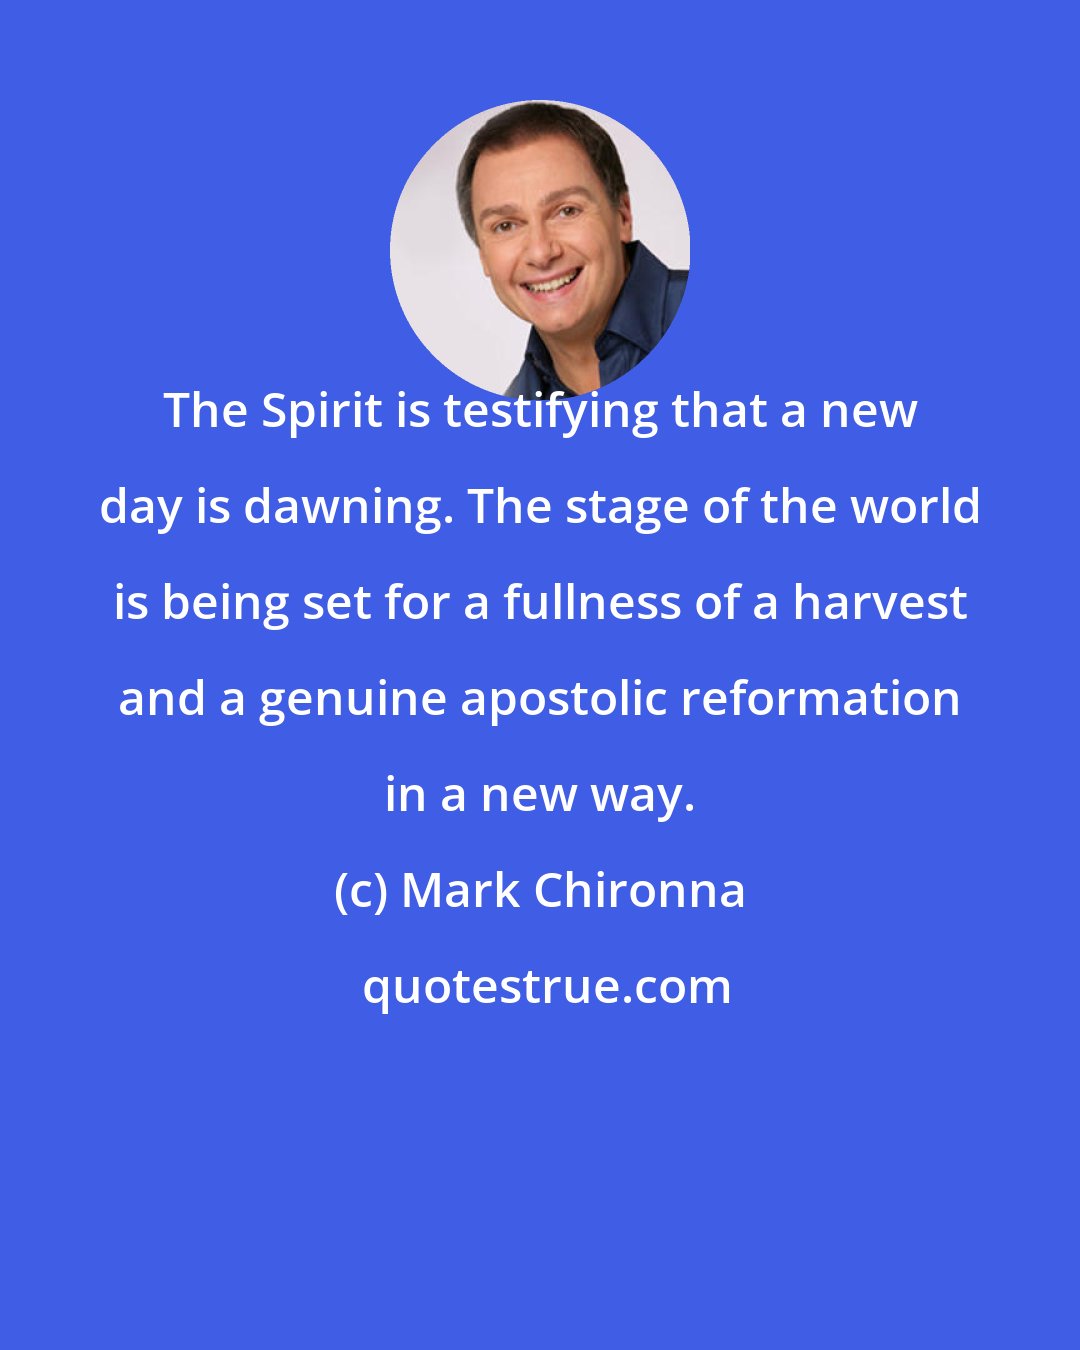 Mark Chironna: The Spirit is testifying that a new day is dawning. The stage of the world is being set for a fullness of a harvest and a genuine apostolic reformation in a new way.